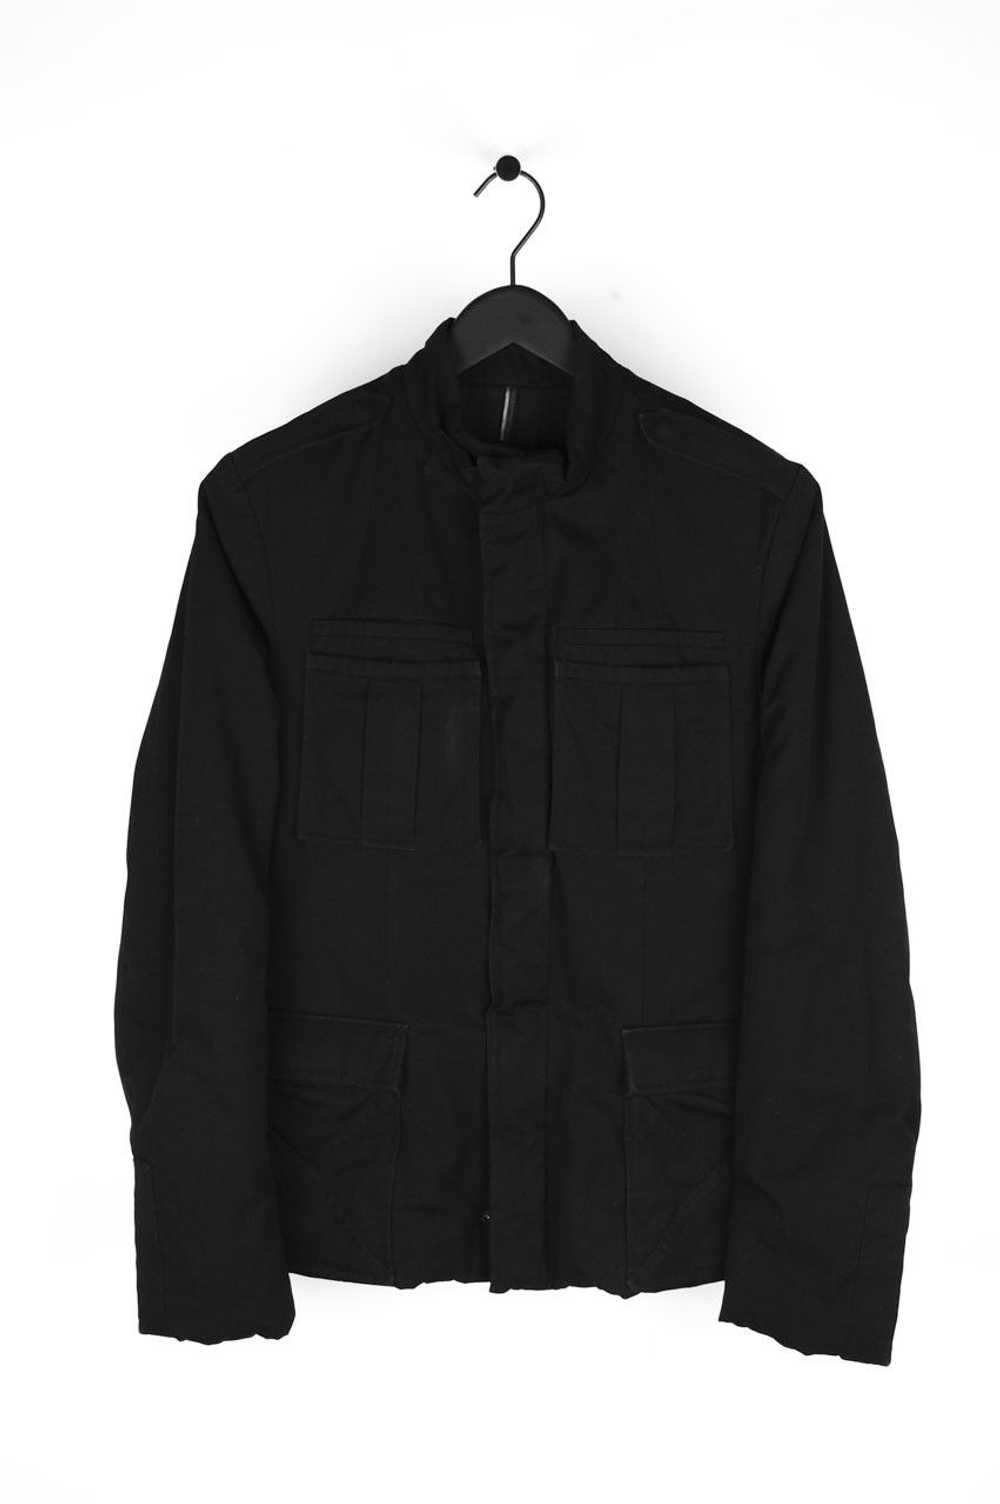 Dior Homme By Hedi Slimane AW03 Luster Bomber Jac… - image 1